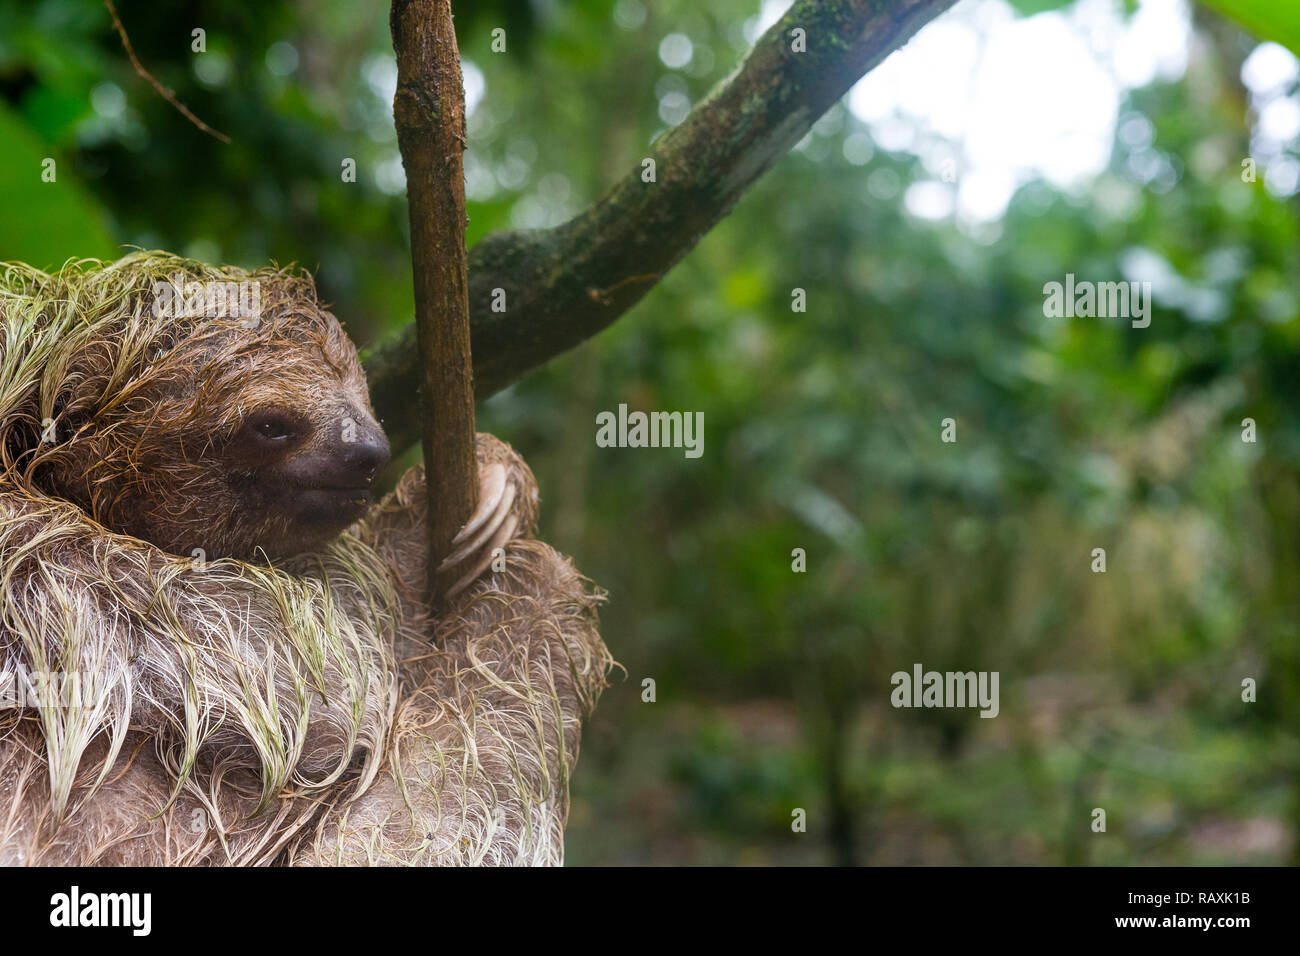 Three-toed sloth in Costa Rican rainforest Stock Photo